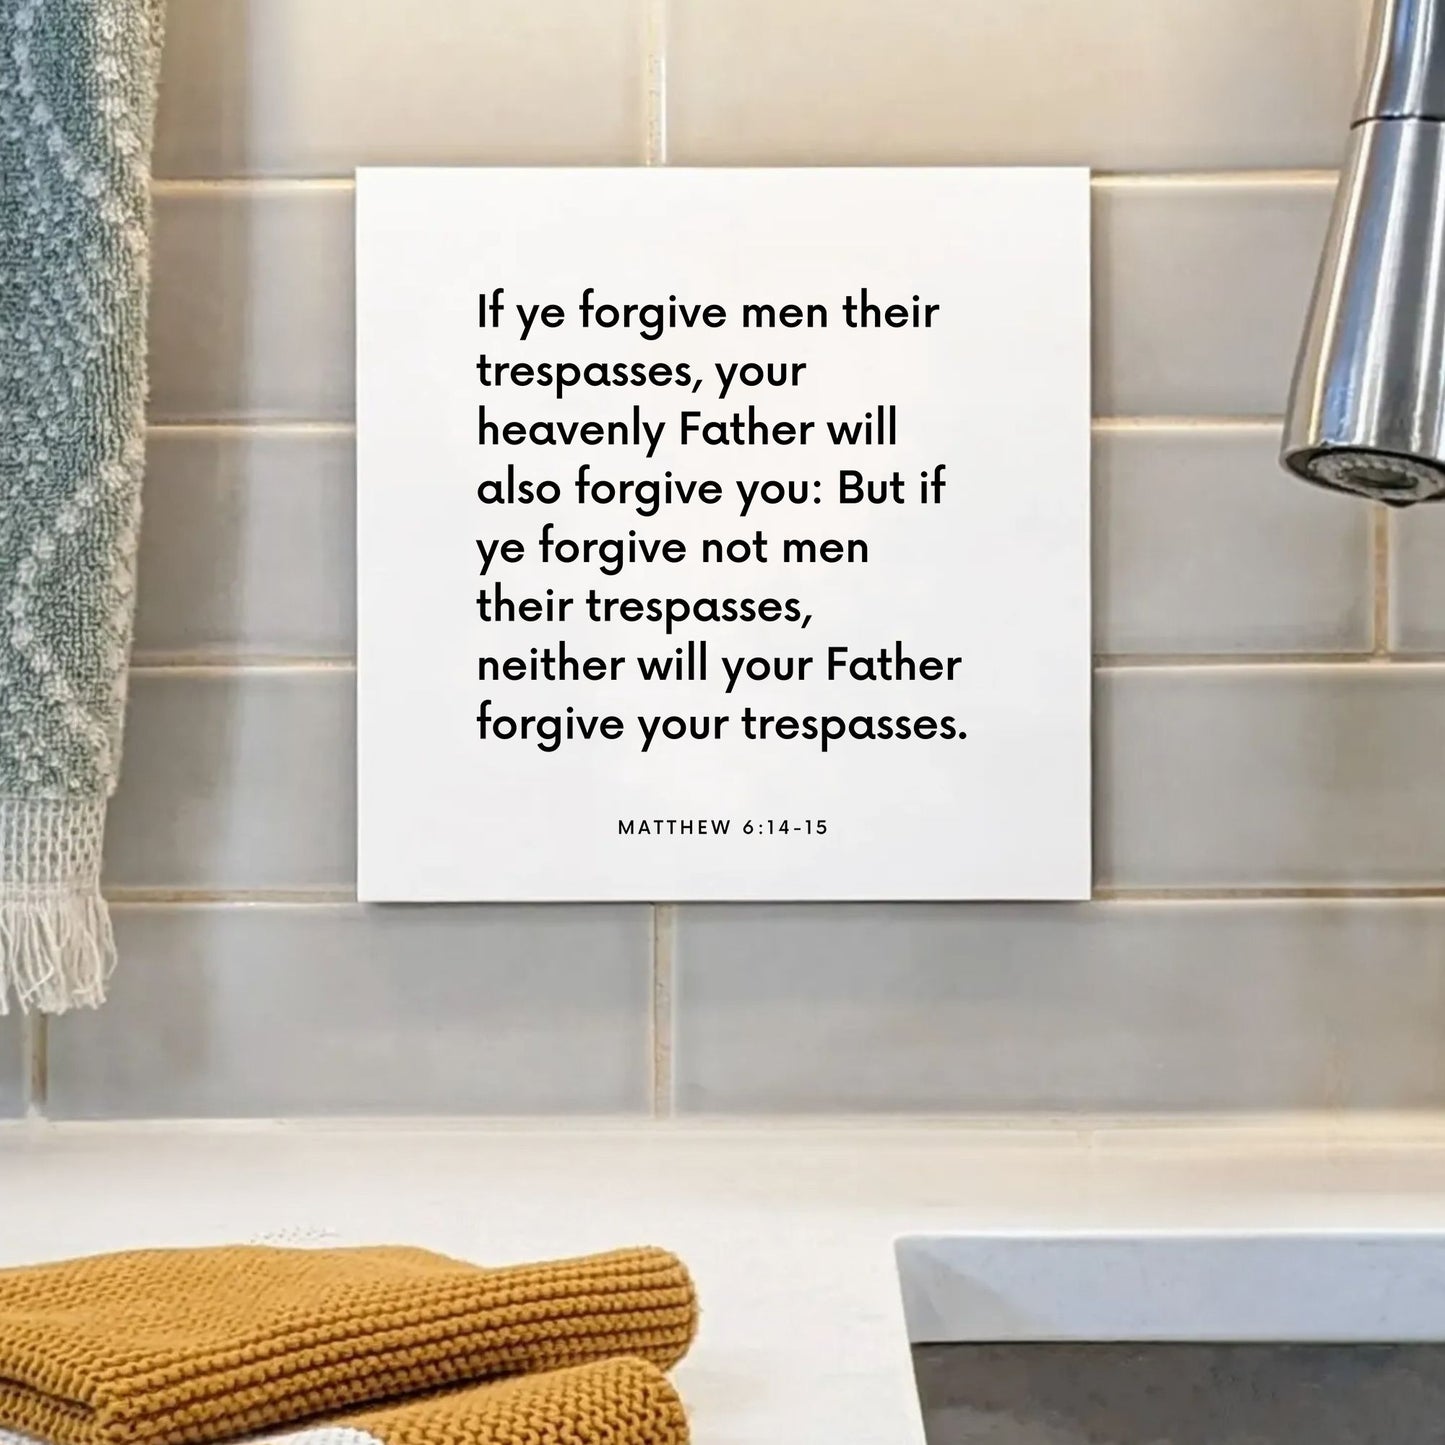 Sink mouting of the scripture tile for Matthew 6:14-15 - "If ye forgive men their trespasses"